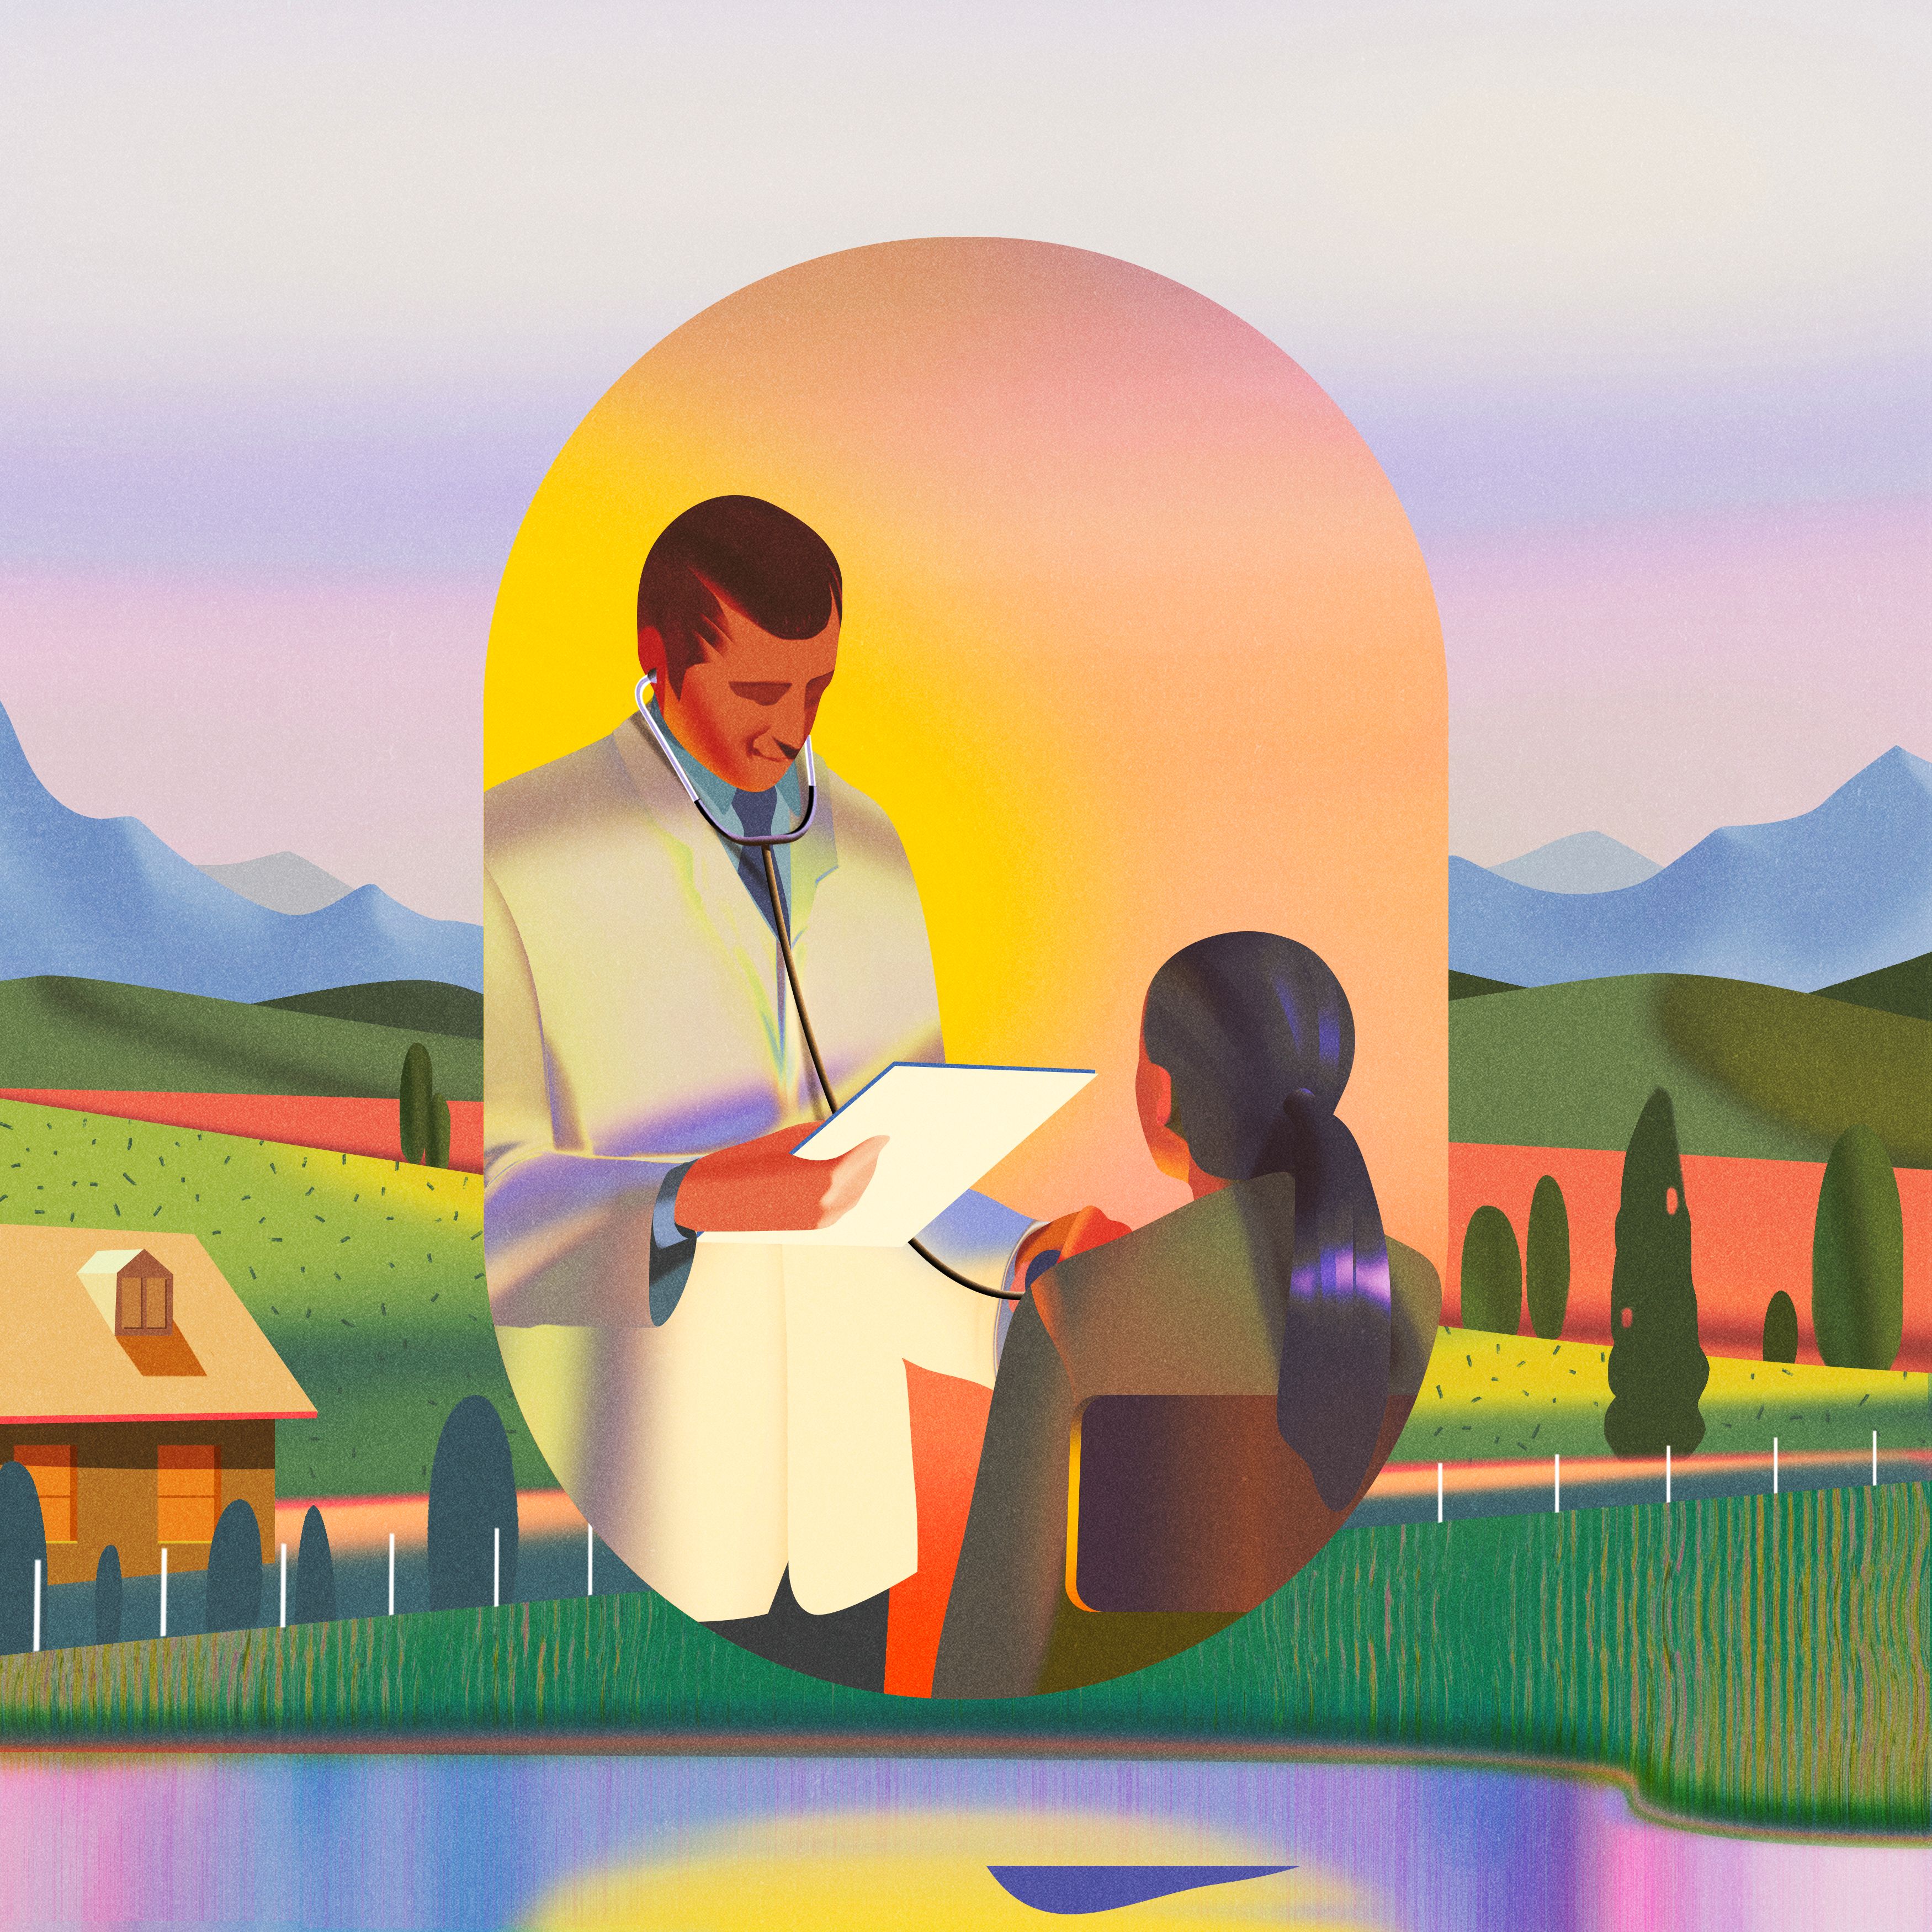 conceptual illustration of a doctor visit in in rural America 